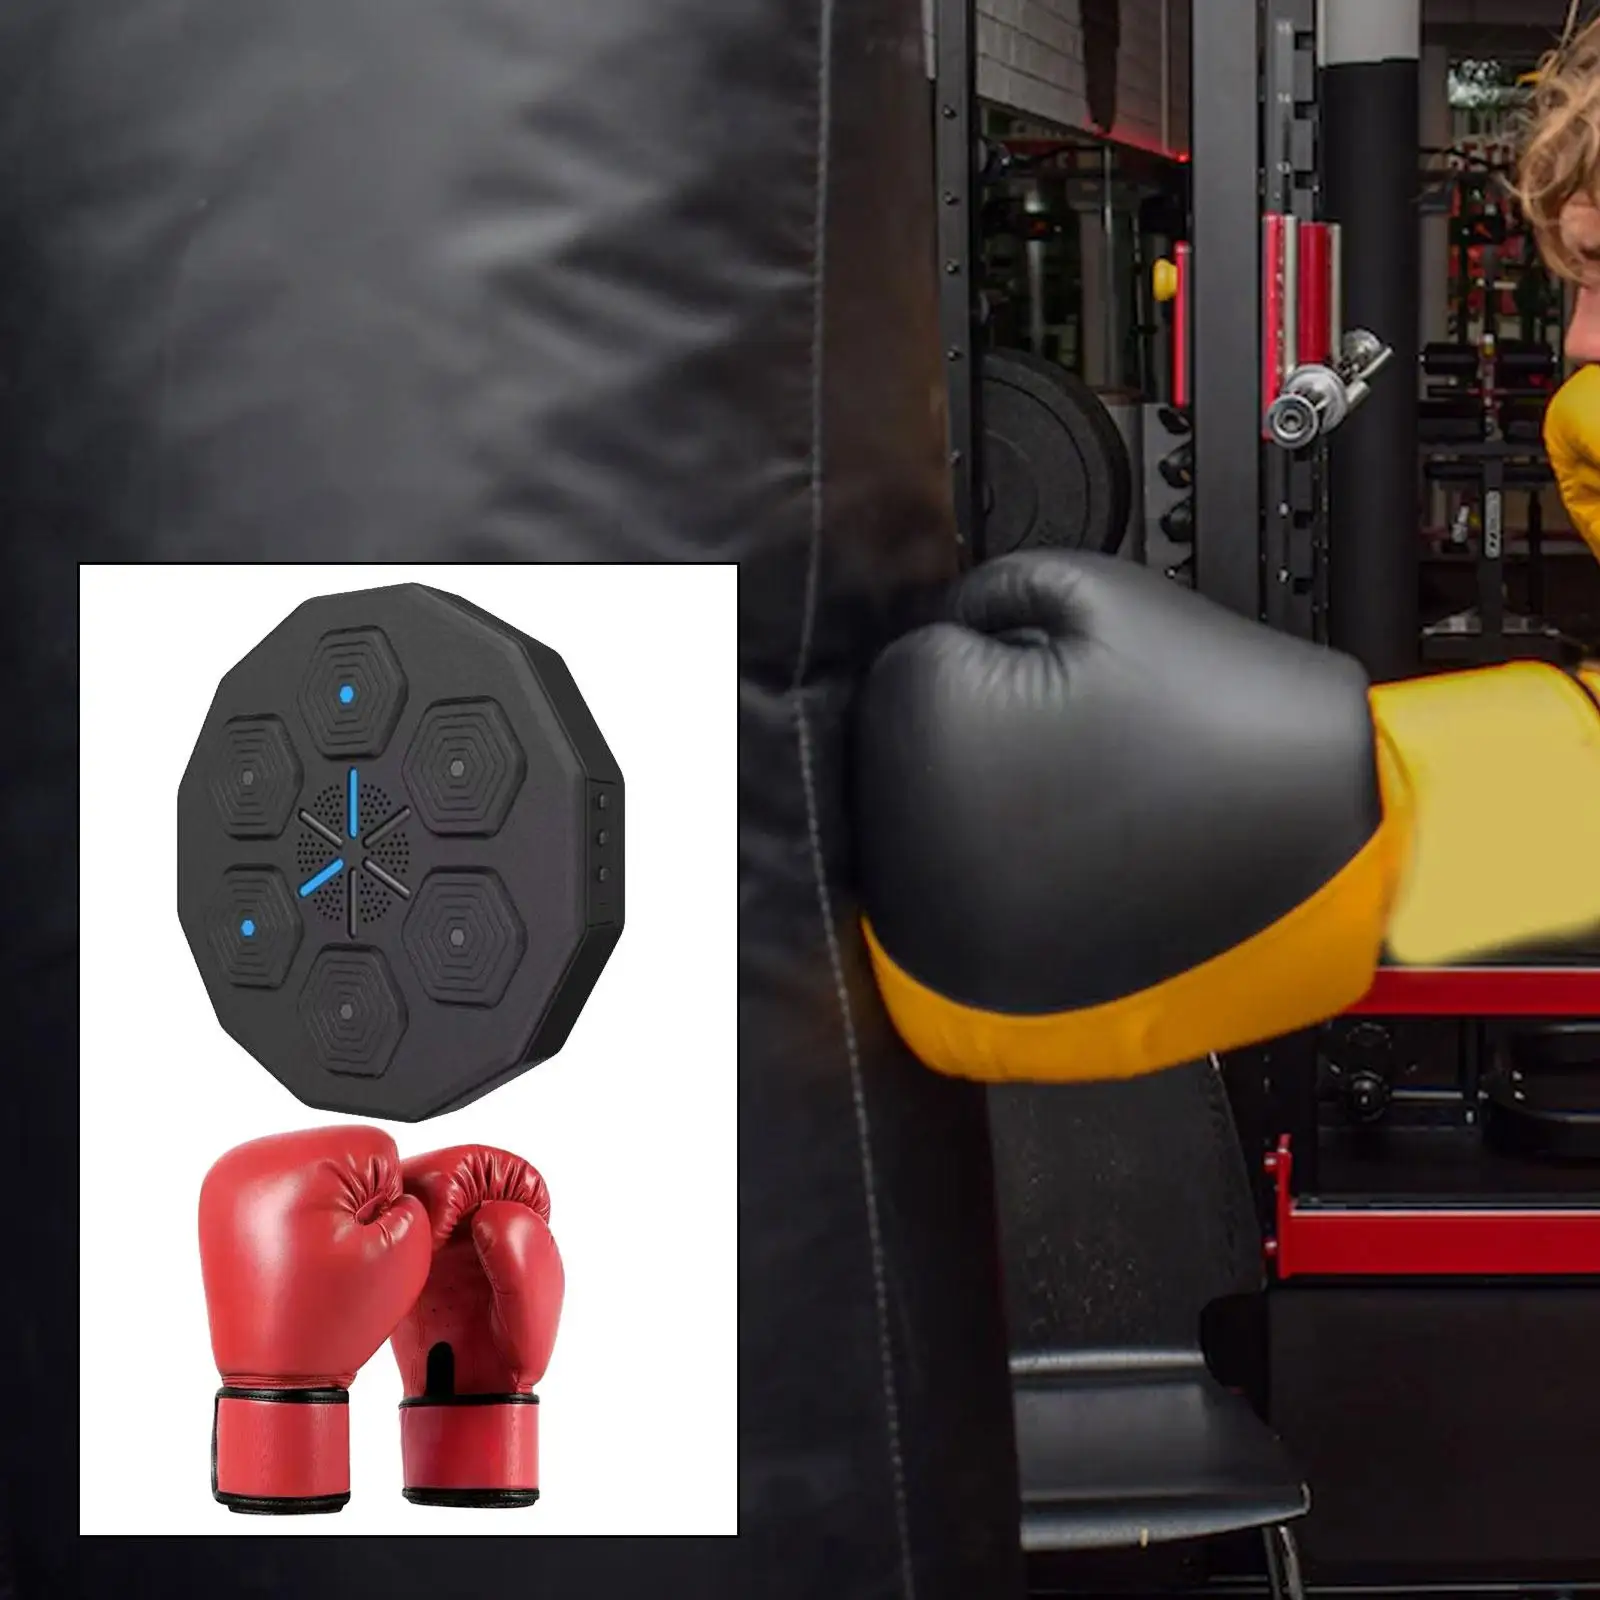 

Music Boxing Machine Punching Bag Wall Mount Rhythm Musical Target Improves Agility Reaction Times Response Coordination